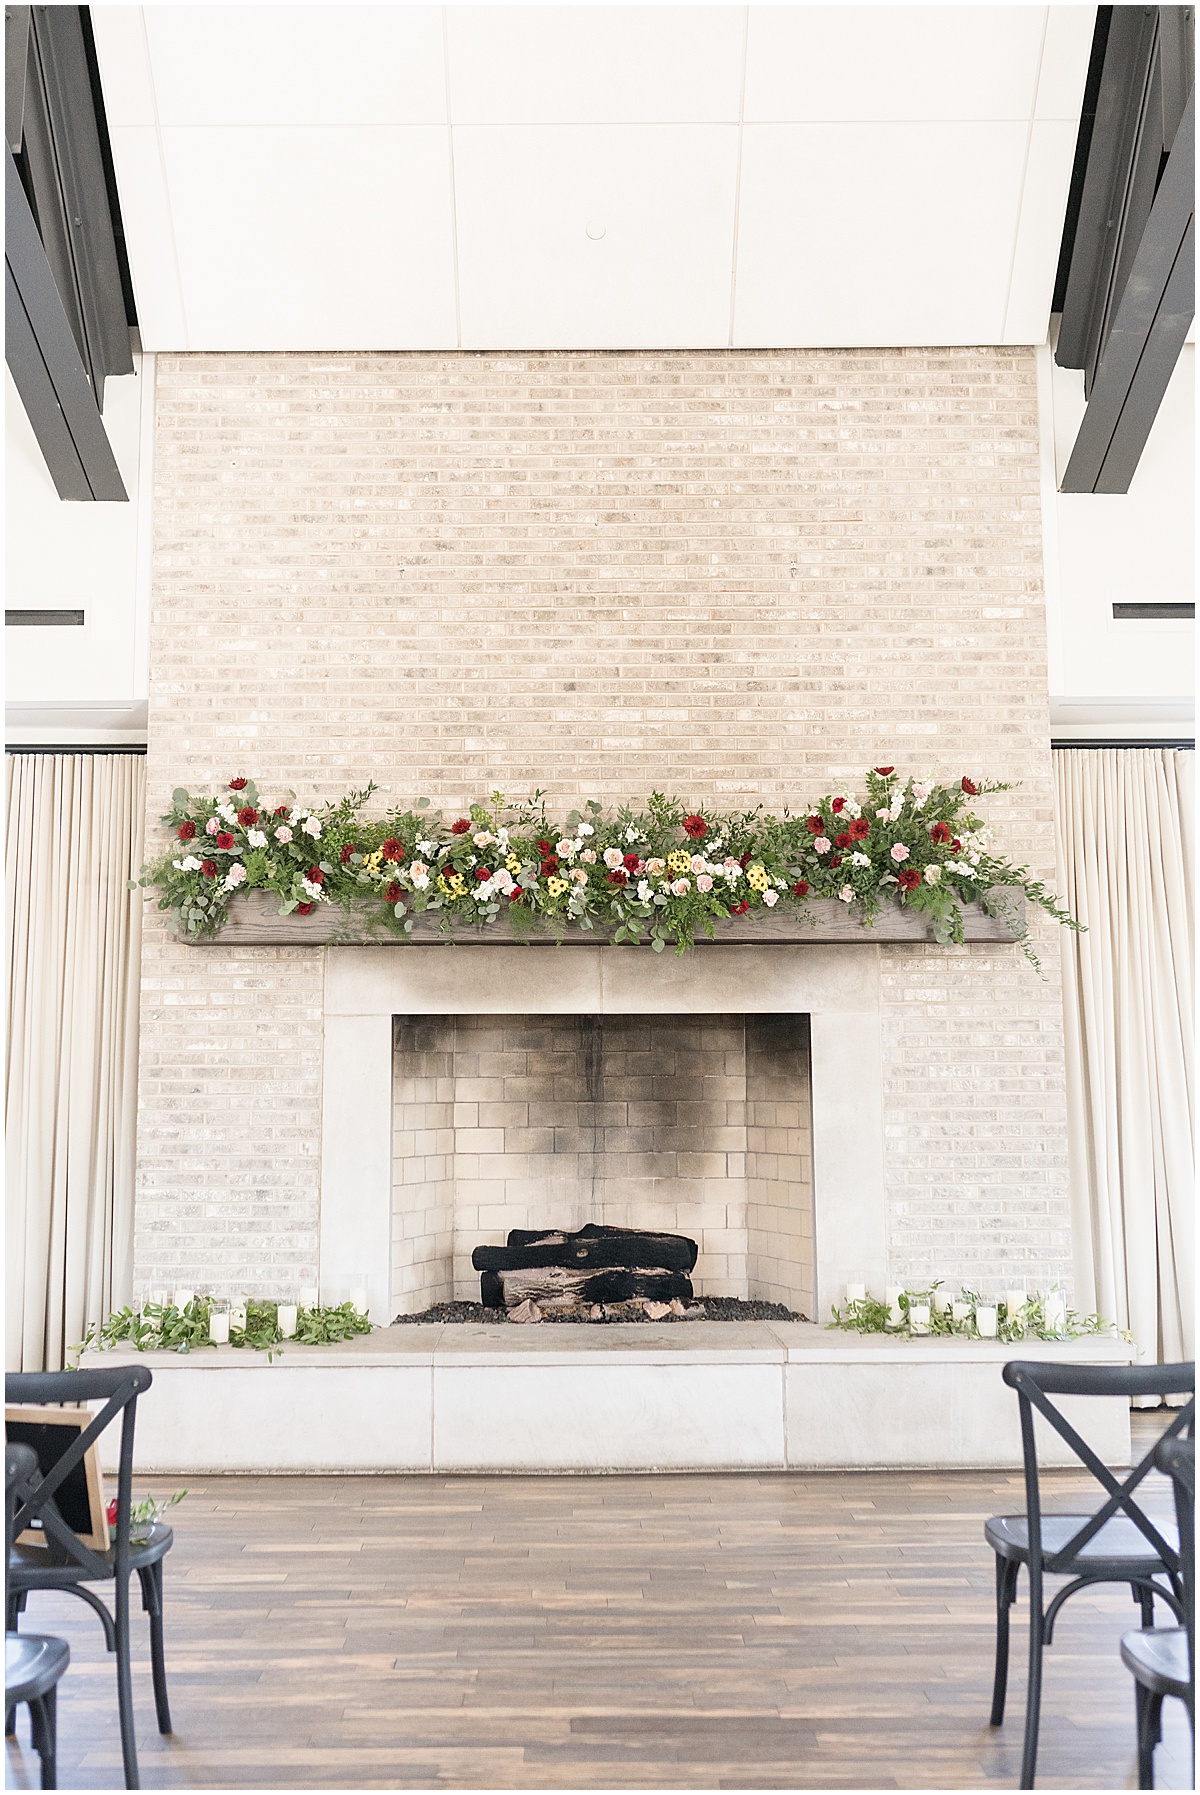 Ceremony space details at Iron & Ember events wedding in Carmel, Indiana